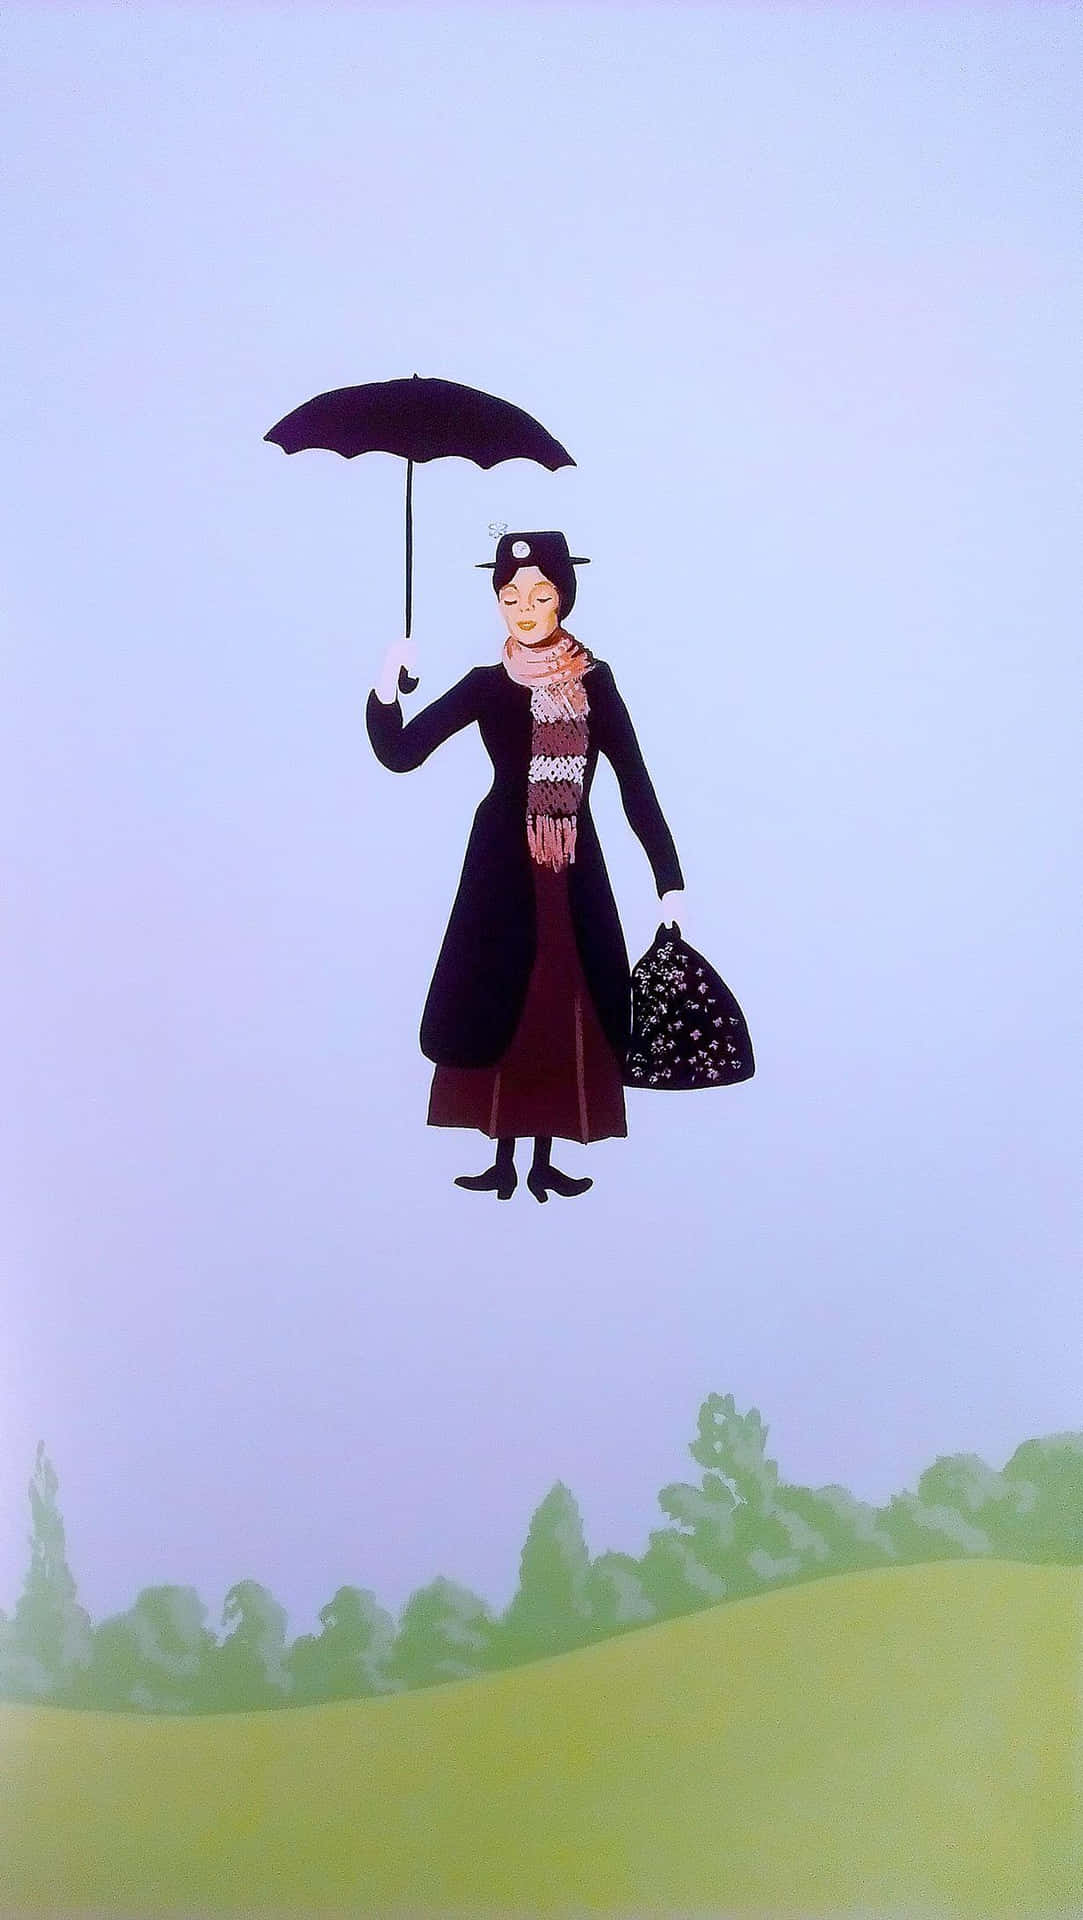 Enchanting Mary Poppins Flies High In The Sky